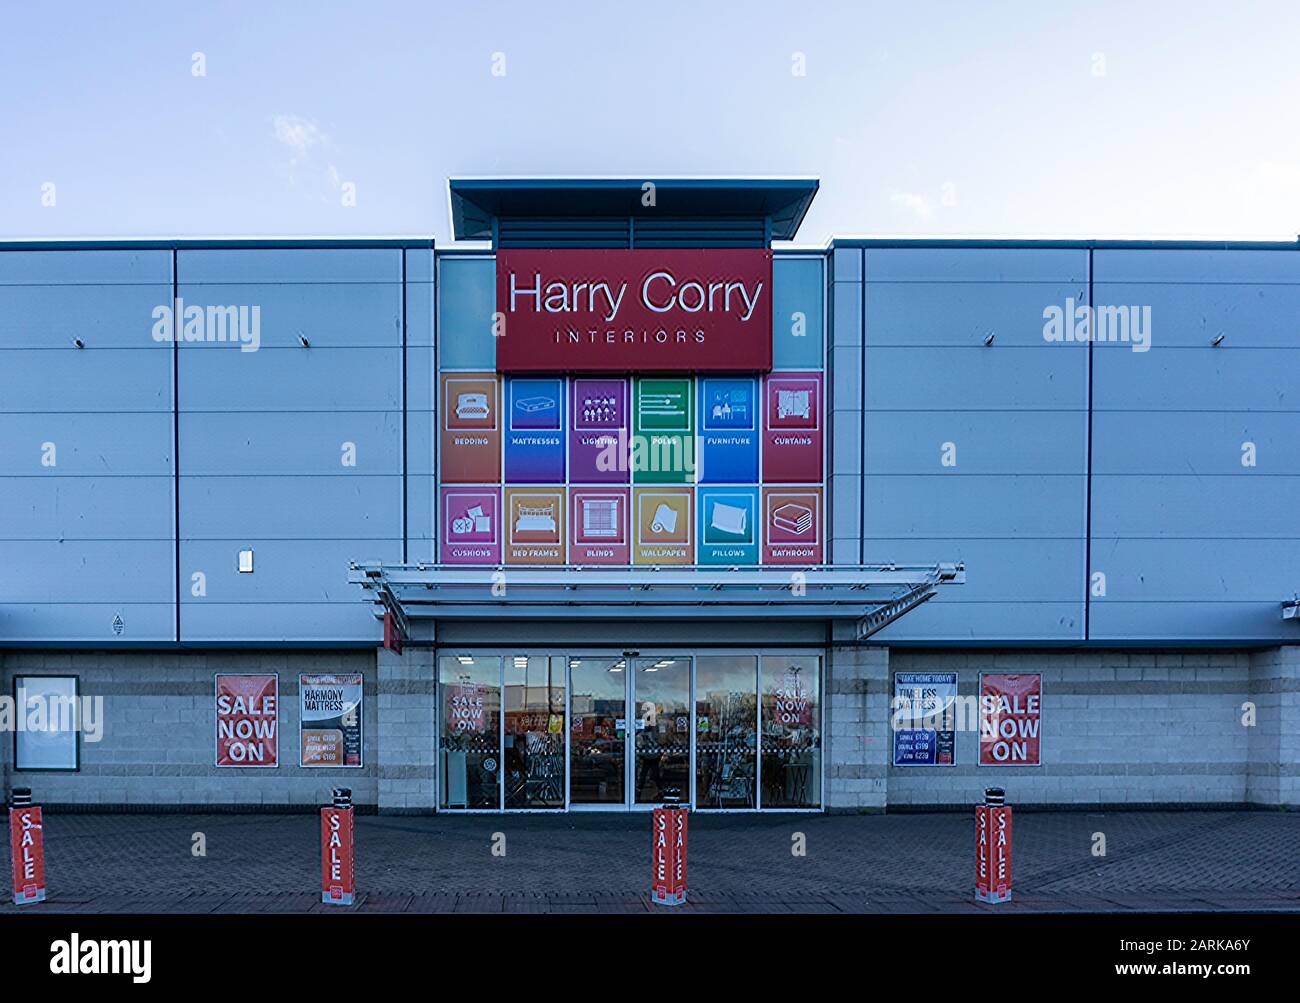 Der Harry Corry Home Furnishings Store im Liffey Valley Retail Park in West Dublin. Stockfoto